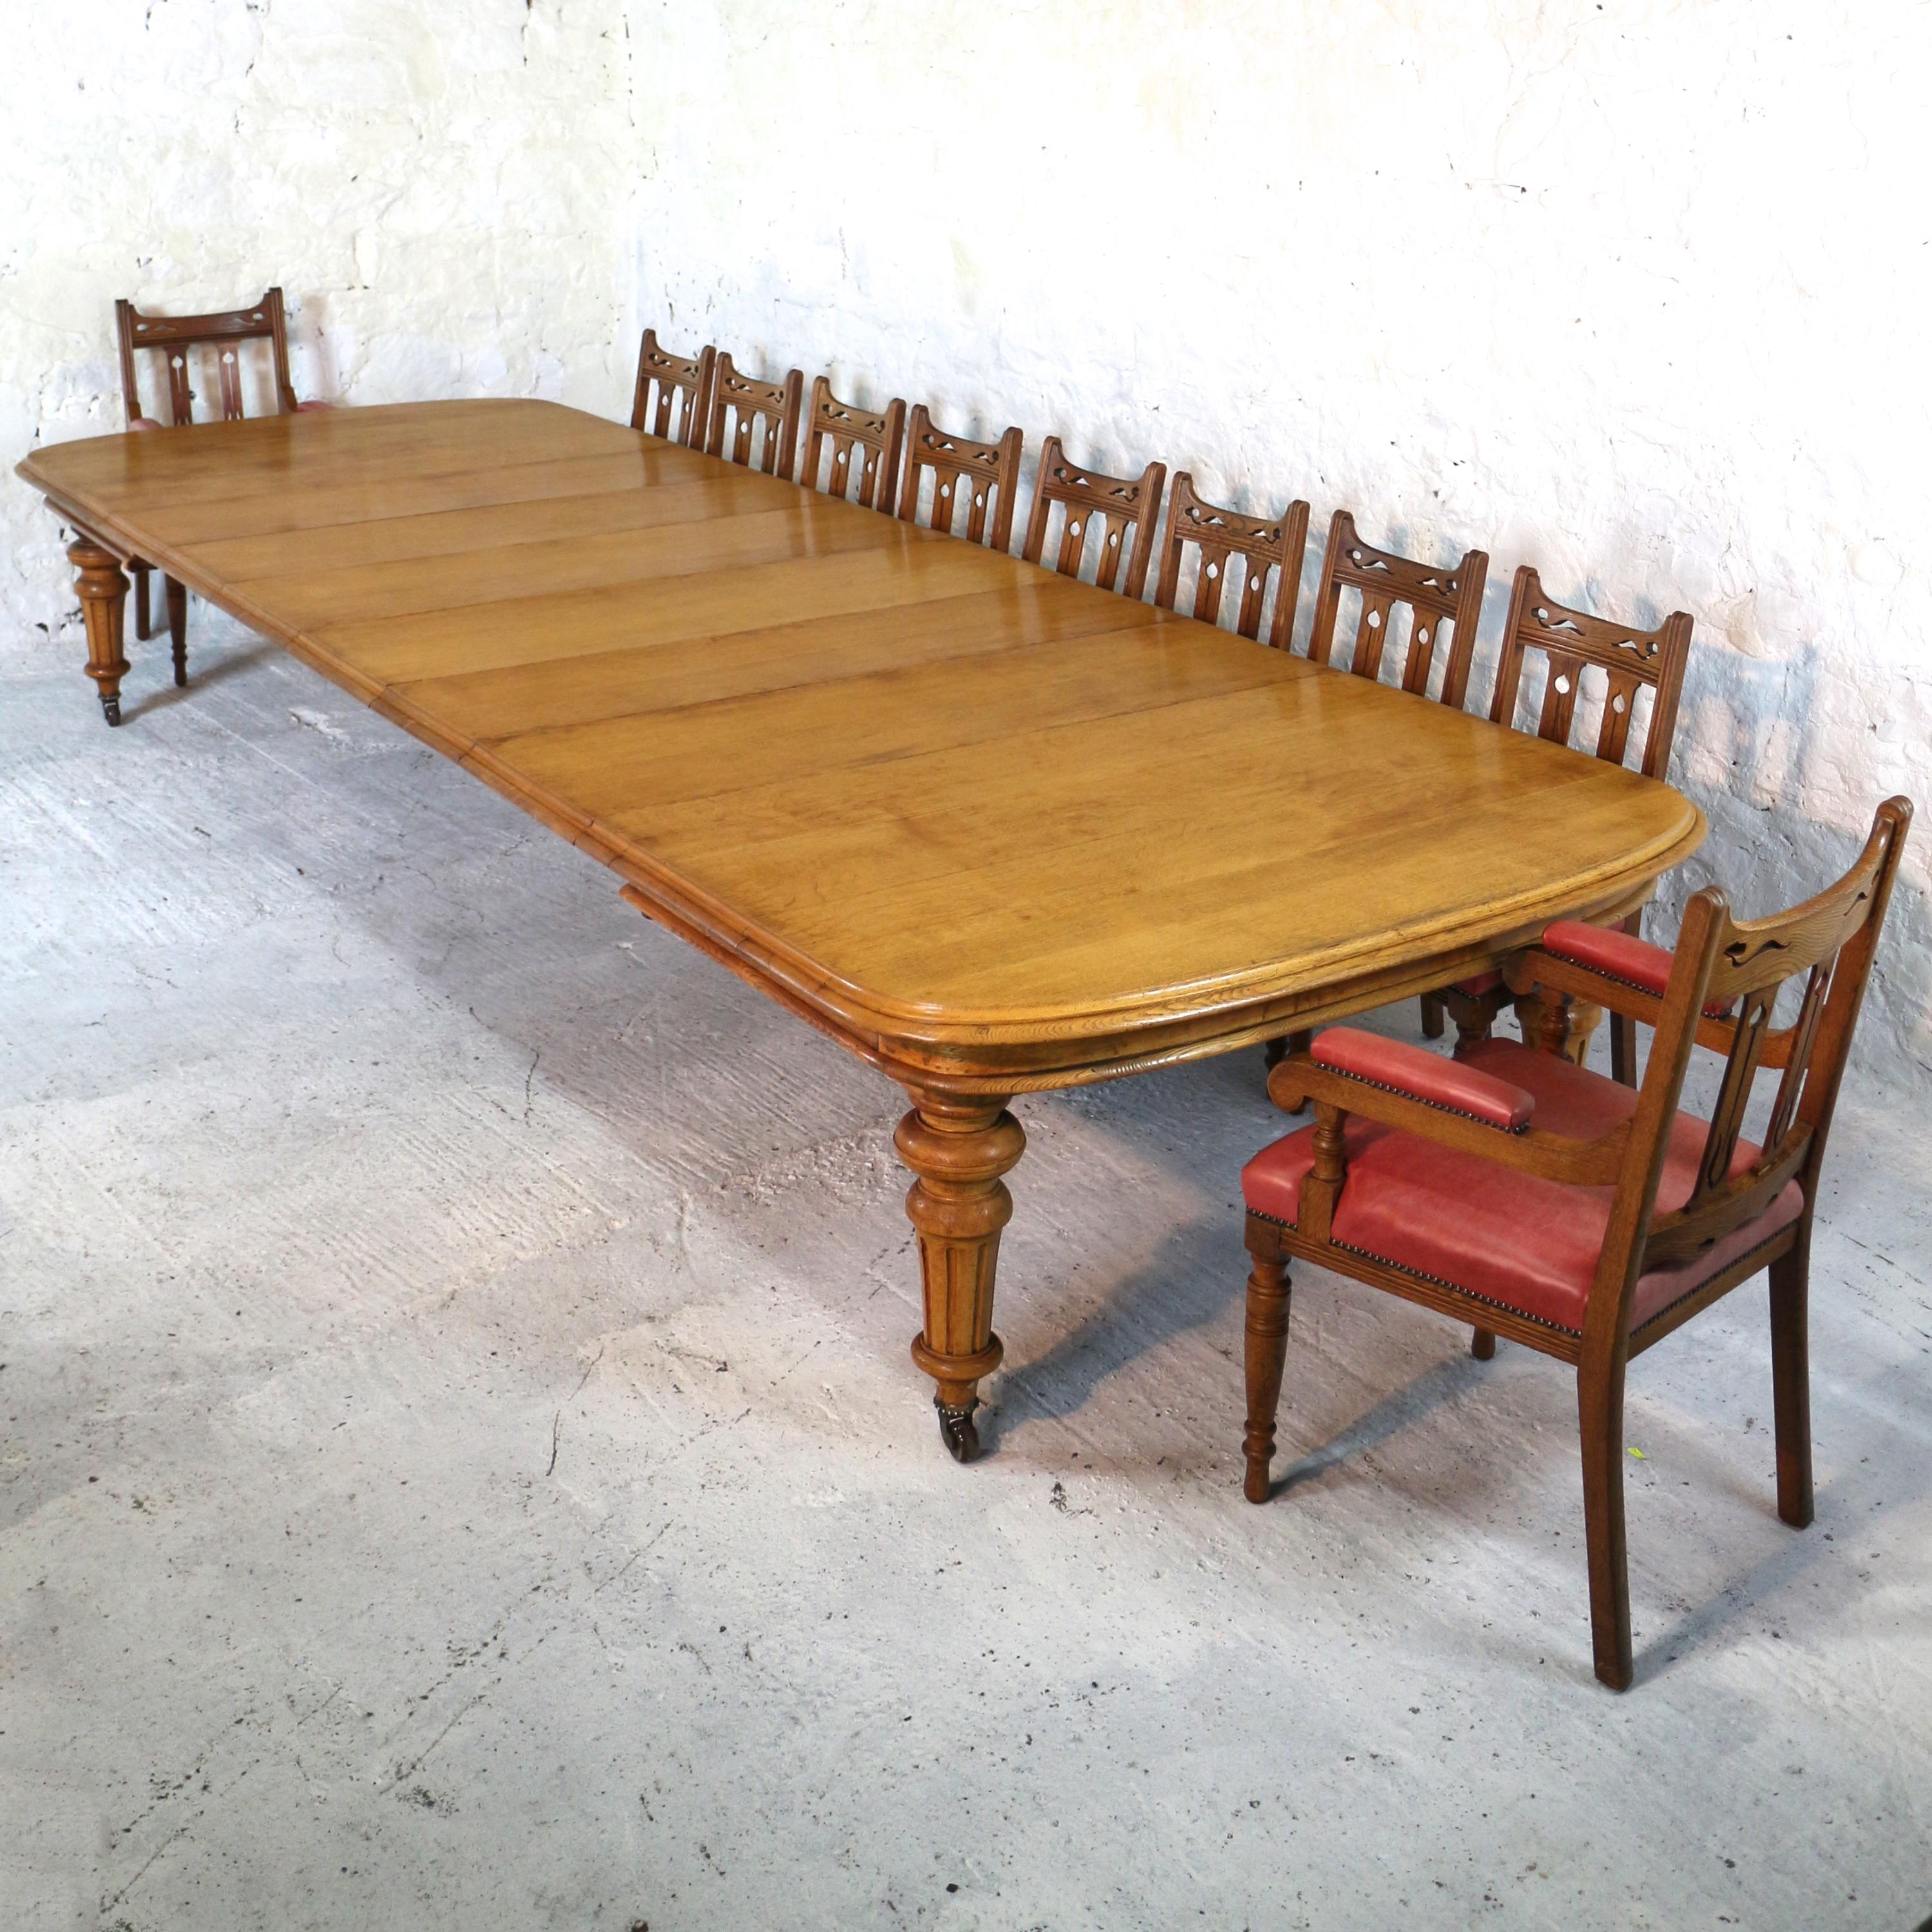 Superb quality extra wide early Victorian extending dining table in golden quarter-sawn oak with six original leaves. Dating to circa 1840 this unusually large 62 1/2in wide table smoothly extends from 6ft8in to 14ft9in using a screw winding